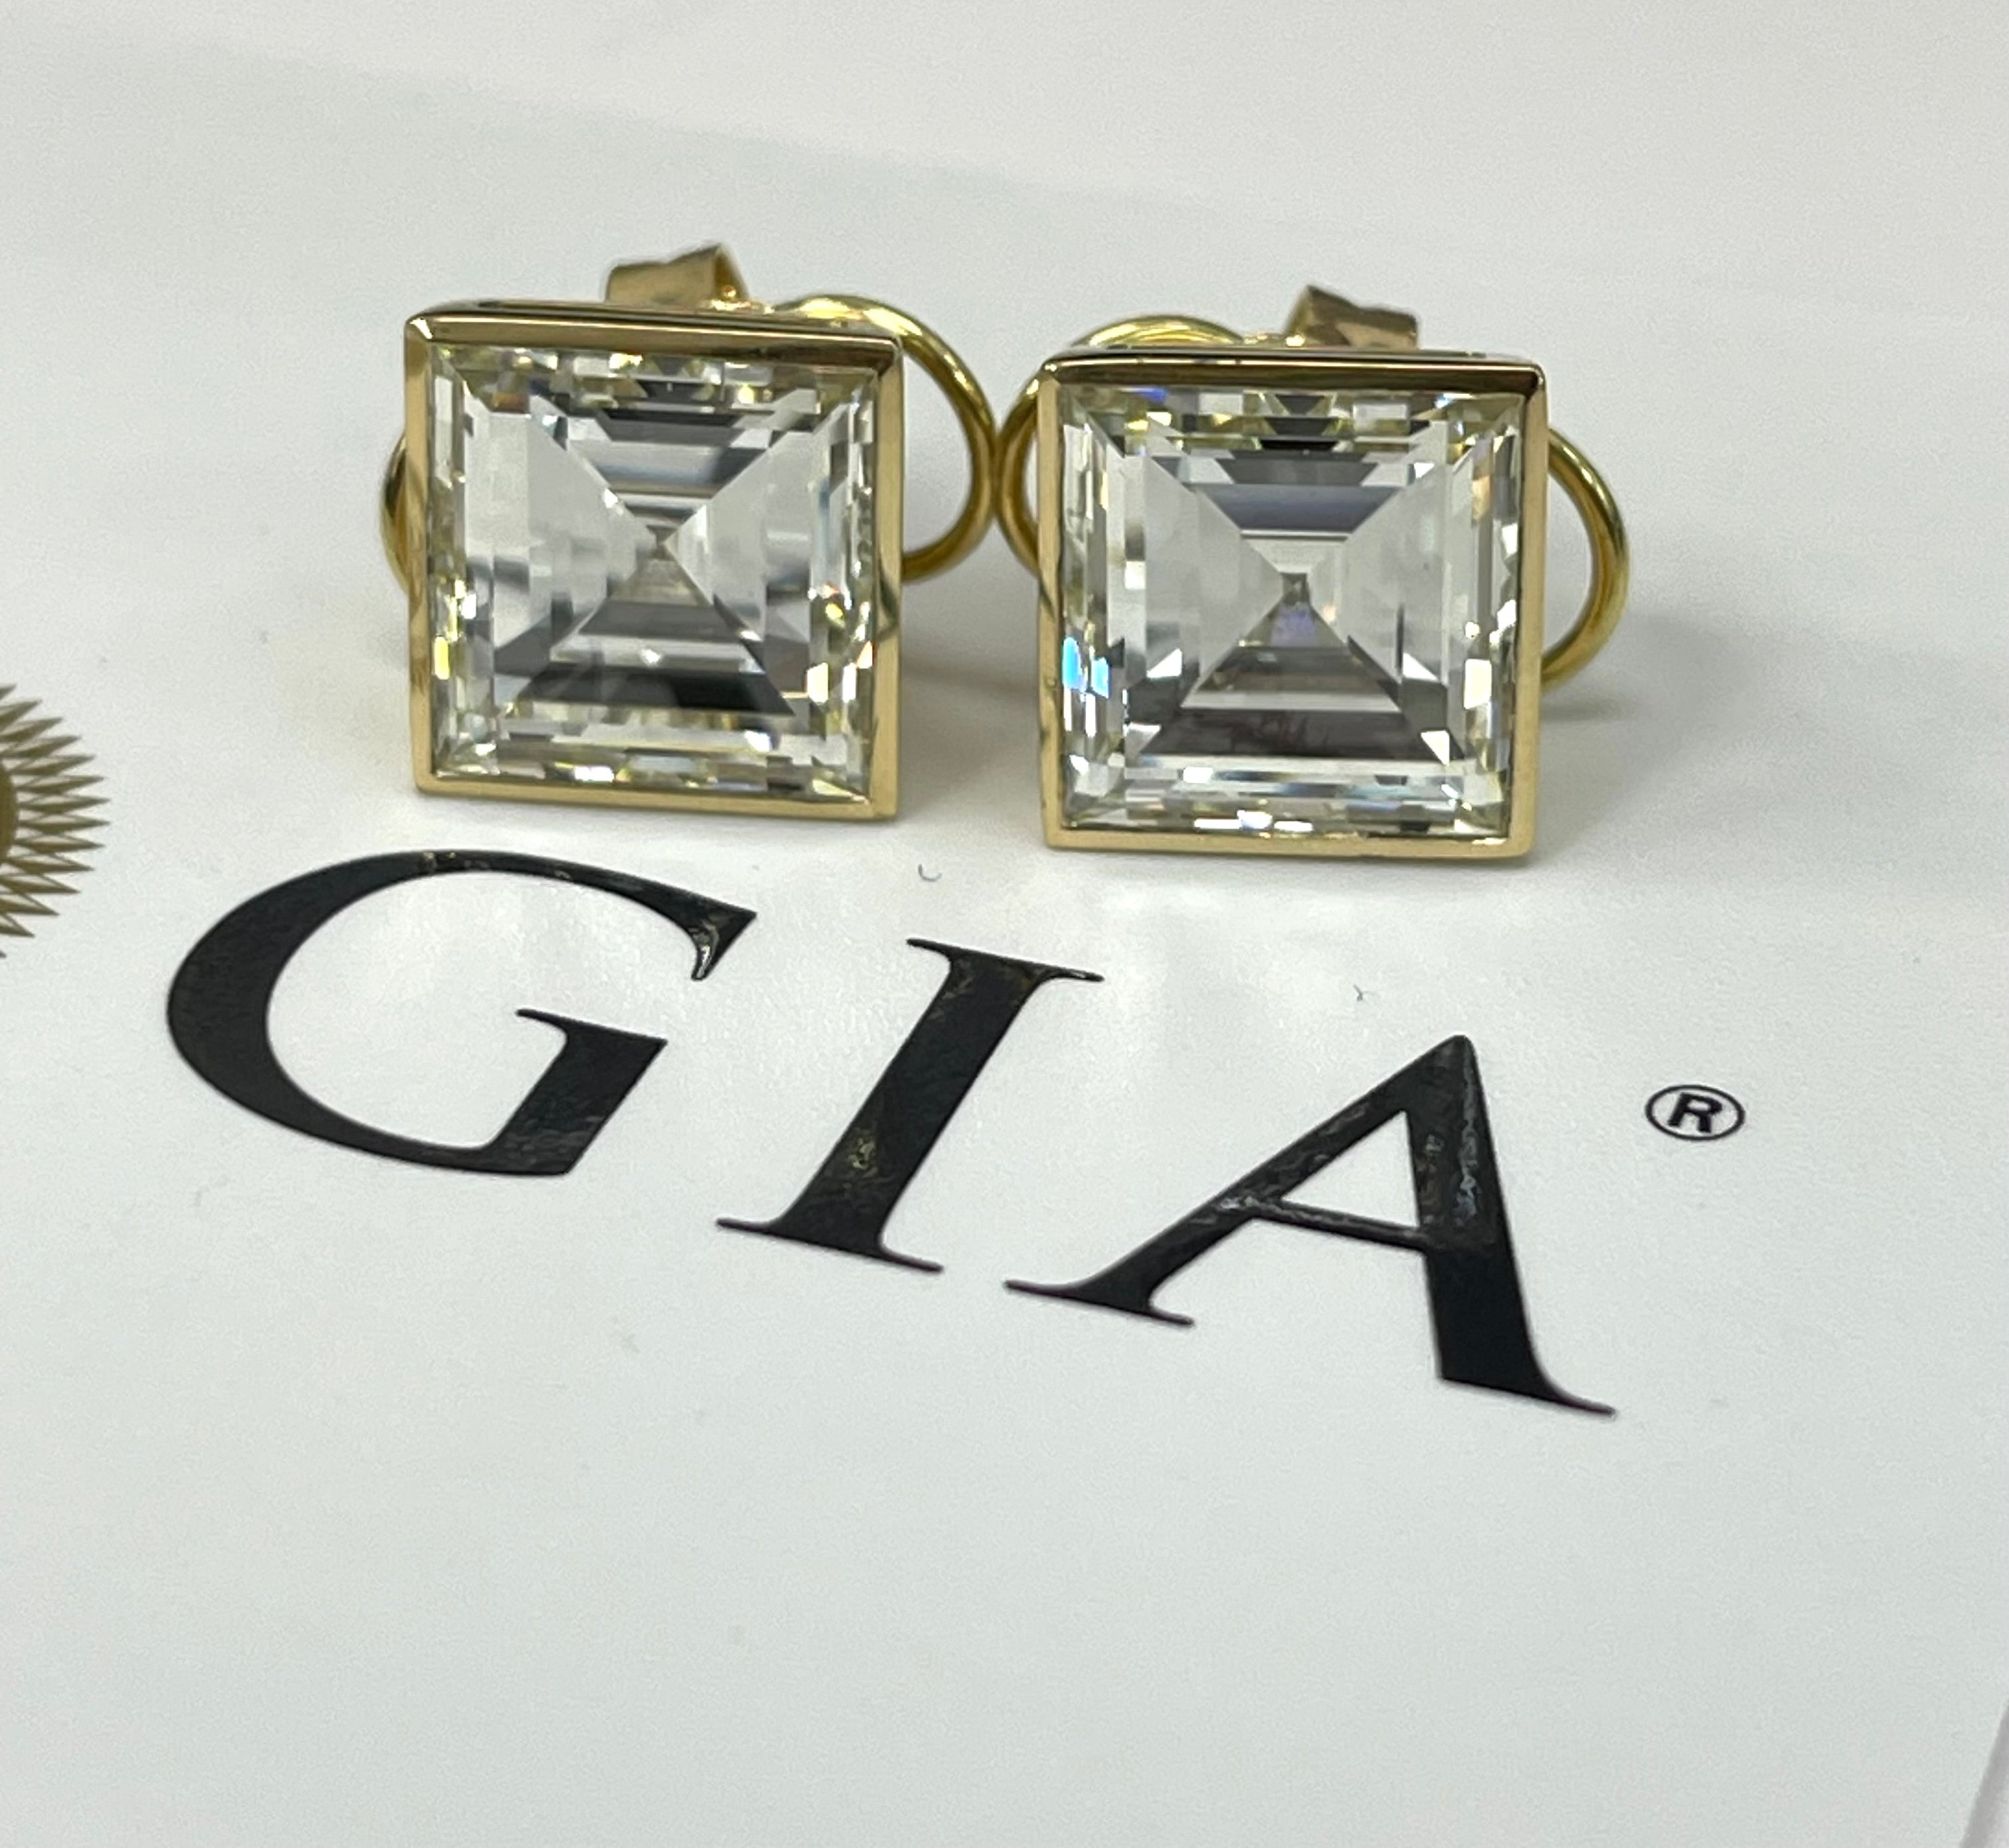 Square Step Cut Diamond Stud Earrings GIA Certified Yellow Gold 18kt